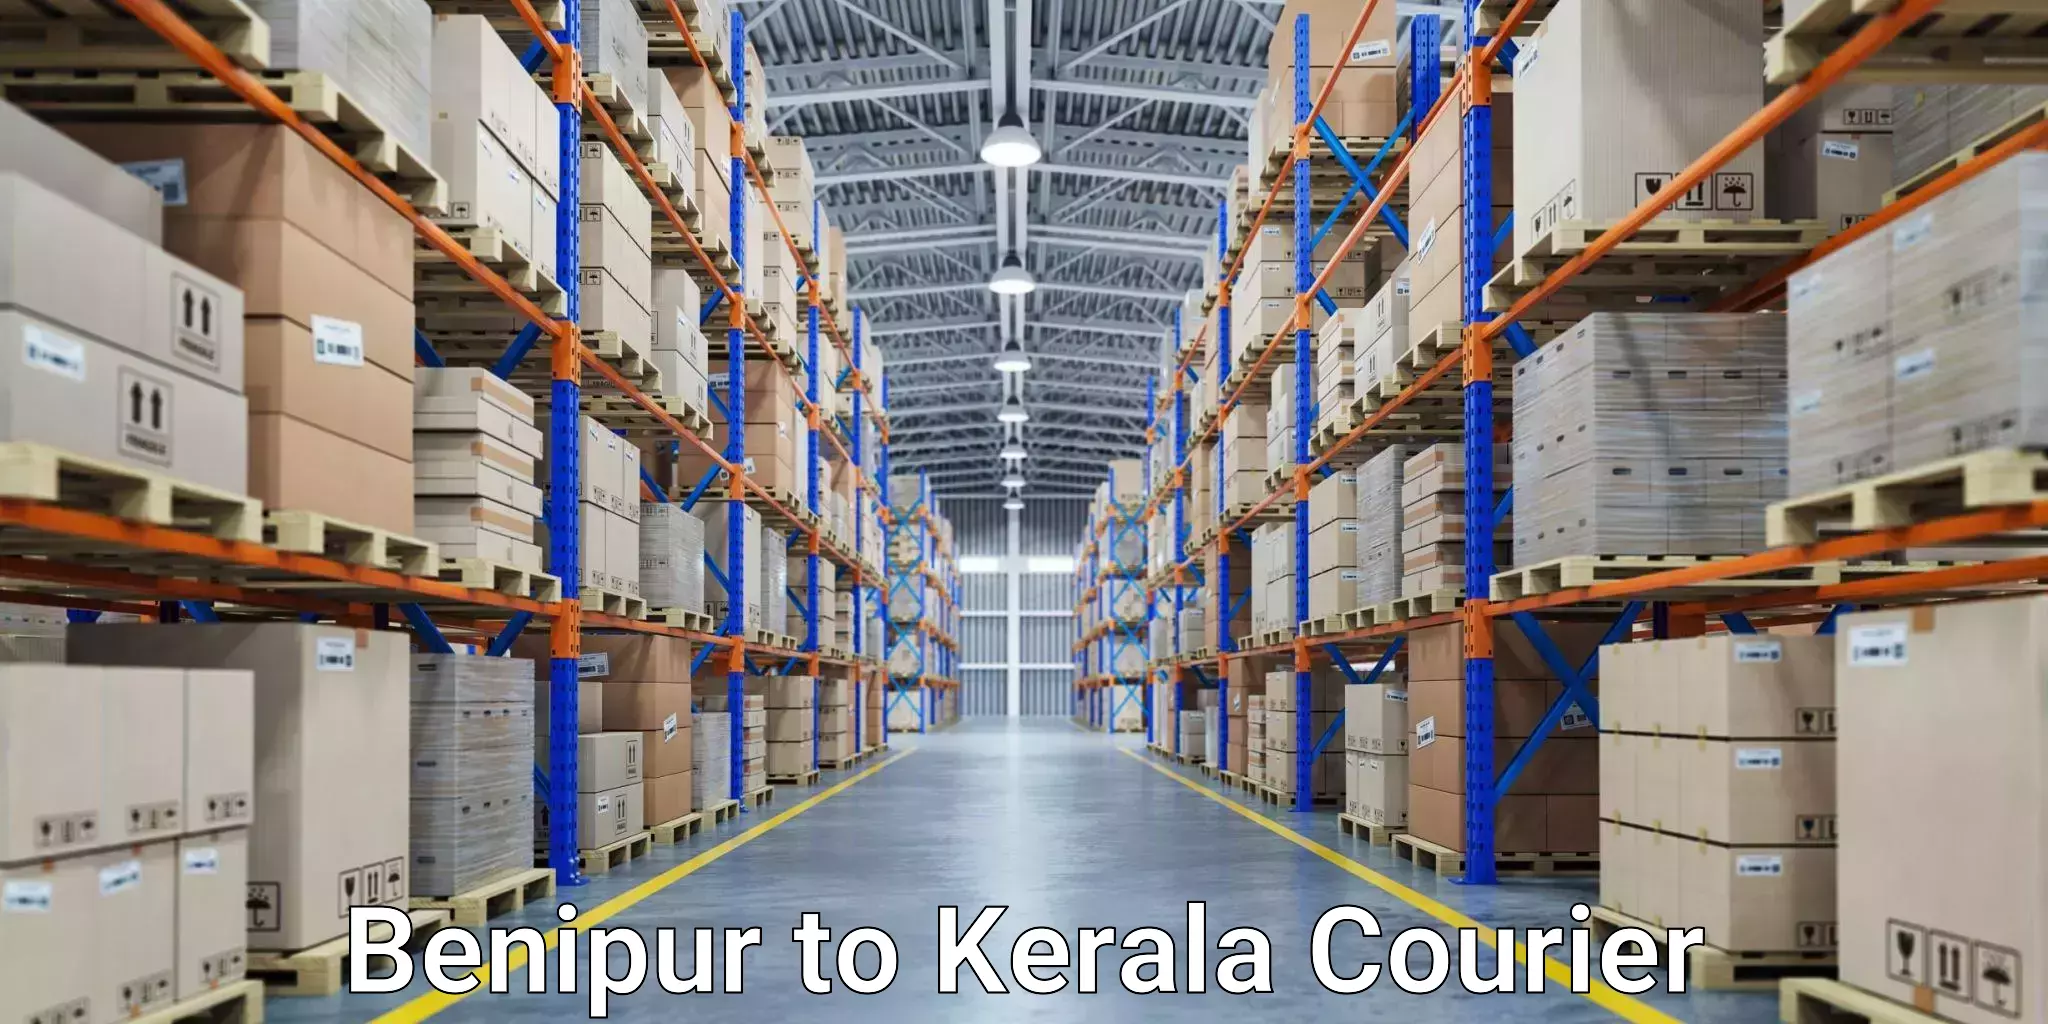 Same-day delivery options Benipur to Cochin Port Kochi